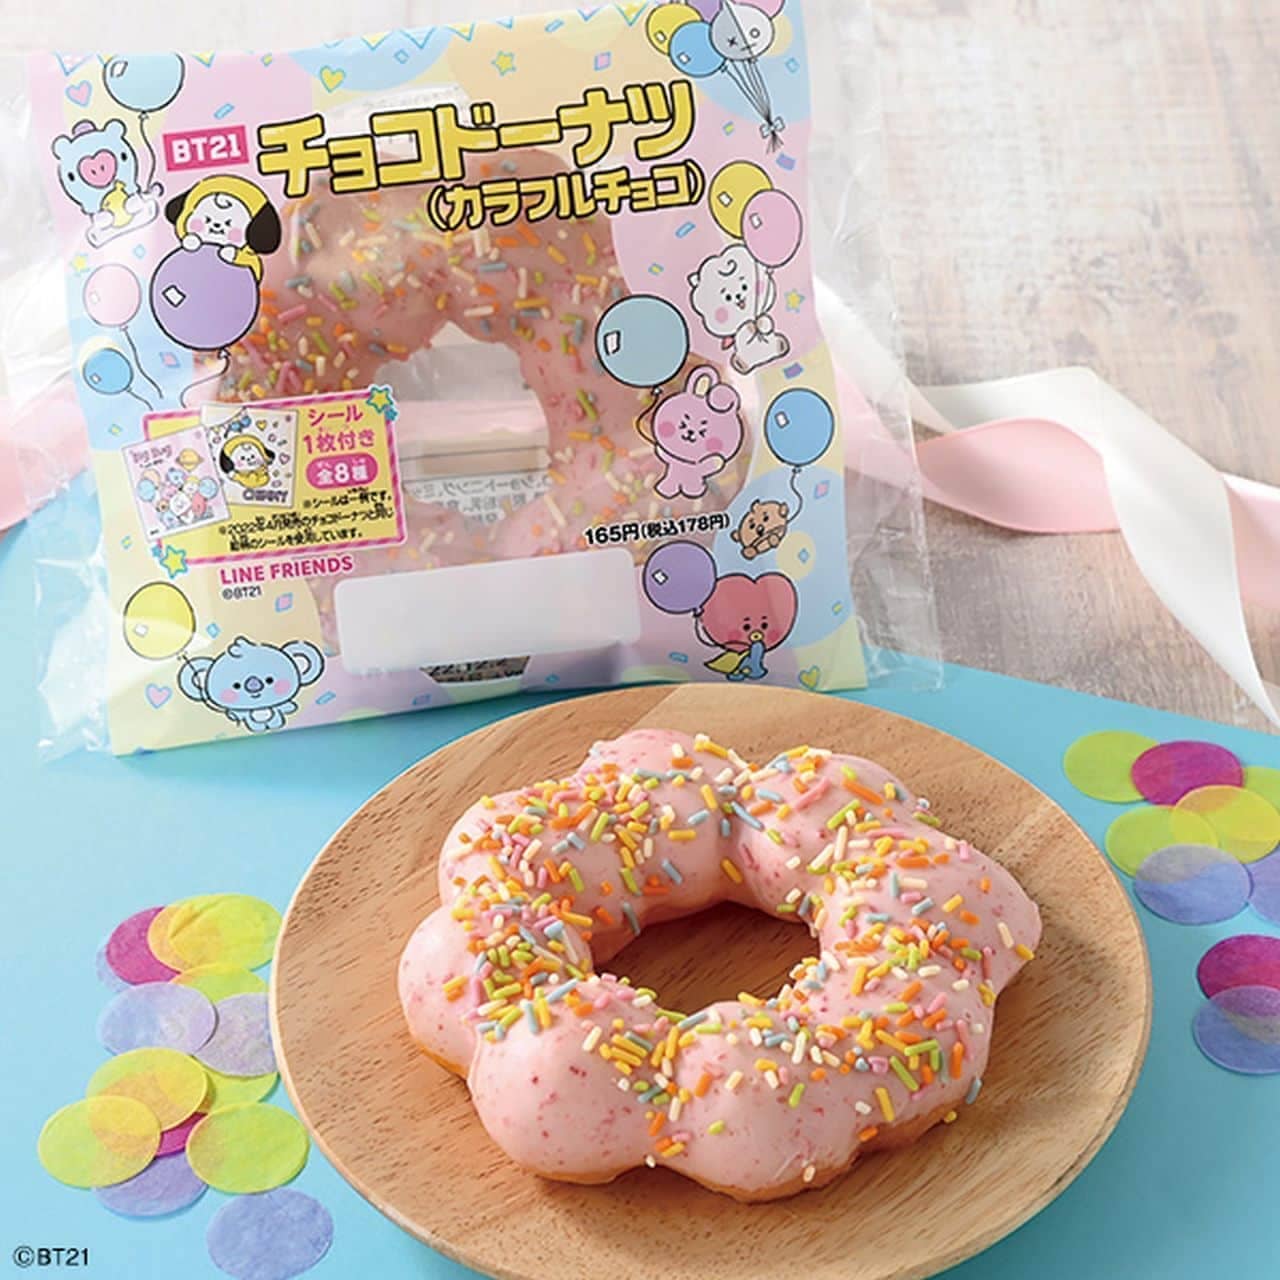 Newly released on December 20] Famima New Arrival Sweets!